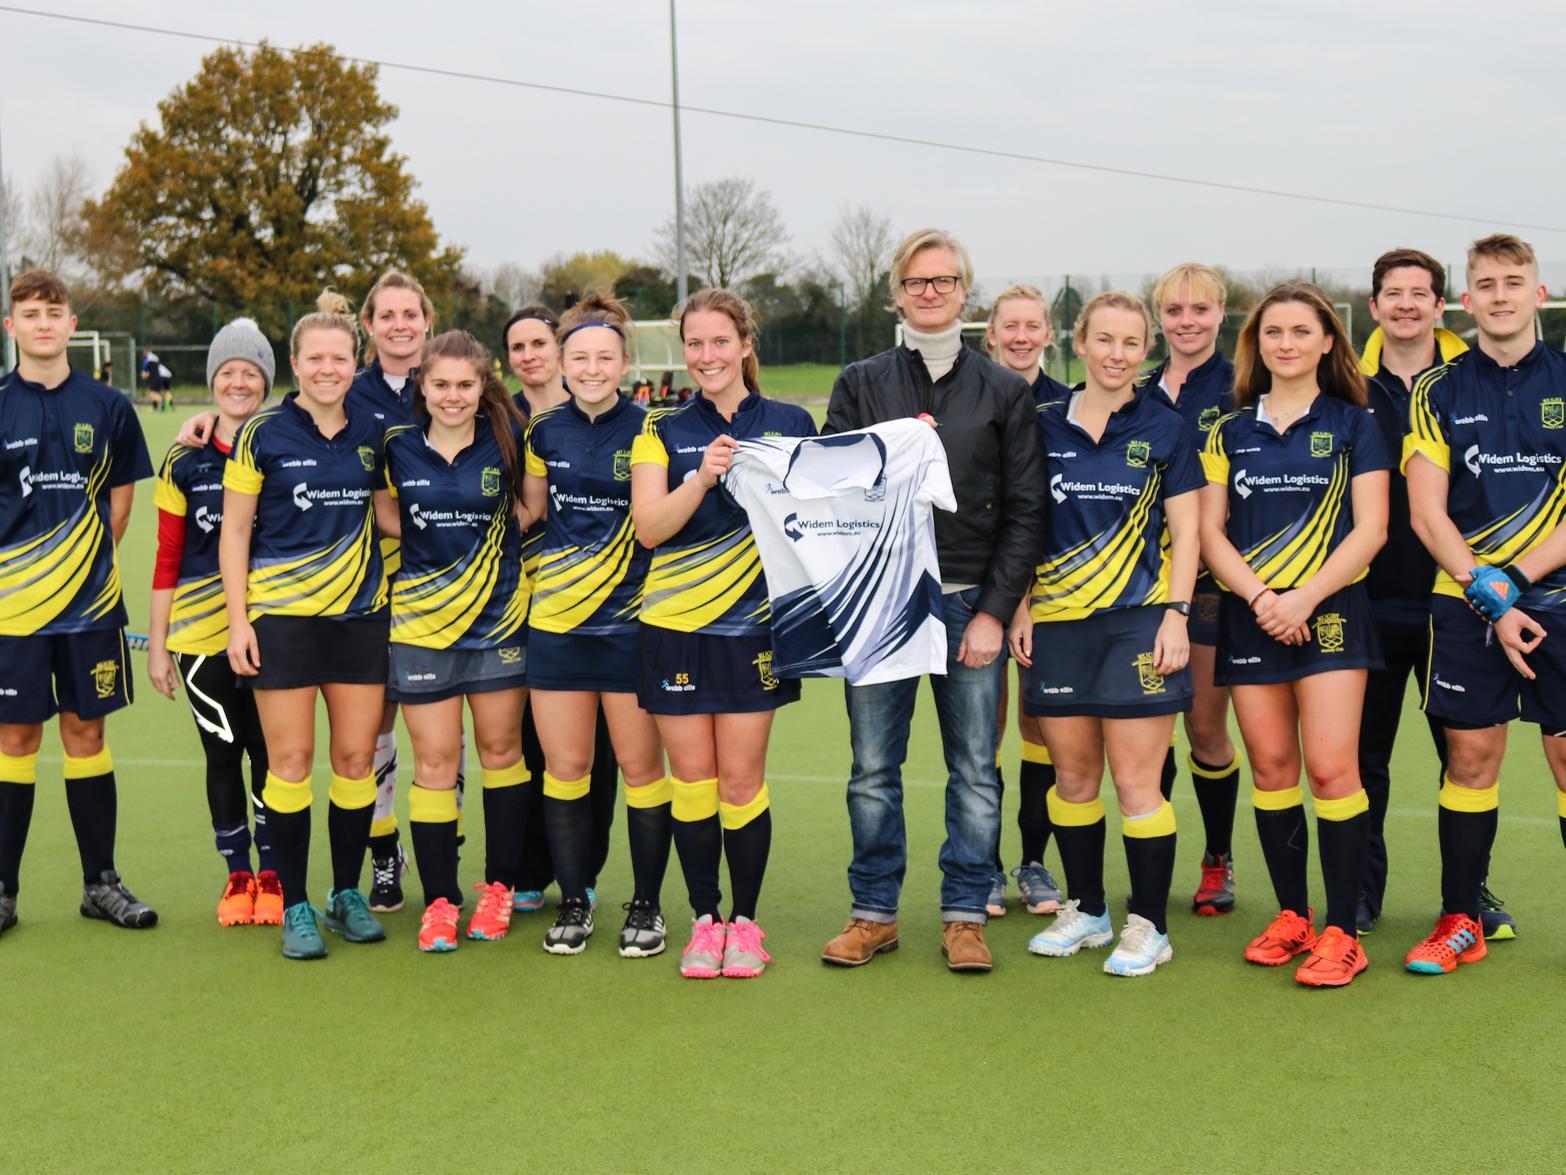 REWHC Mens and Ladies first team players with Russell Green, Managing Director of sponsors Widem Logistics